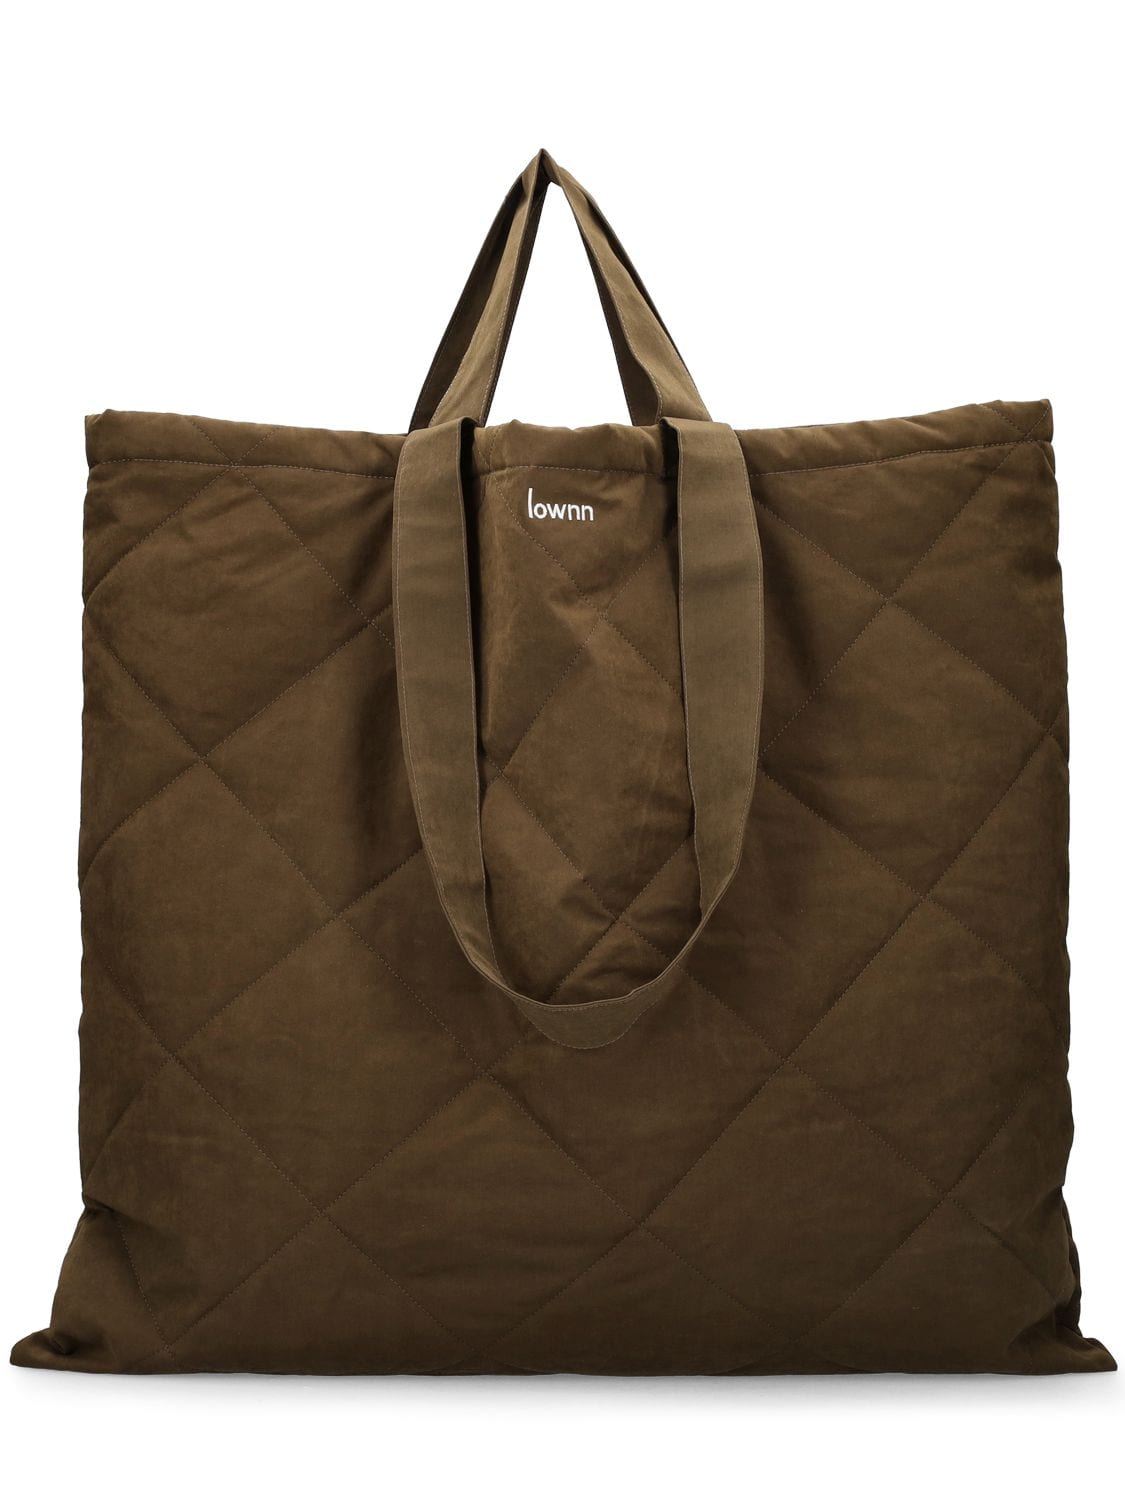 LOWNN Quilted Cotton Blend Tote Bag